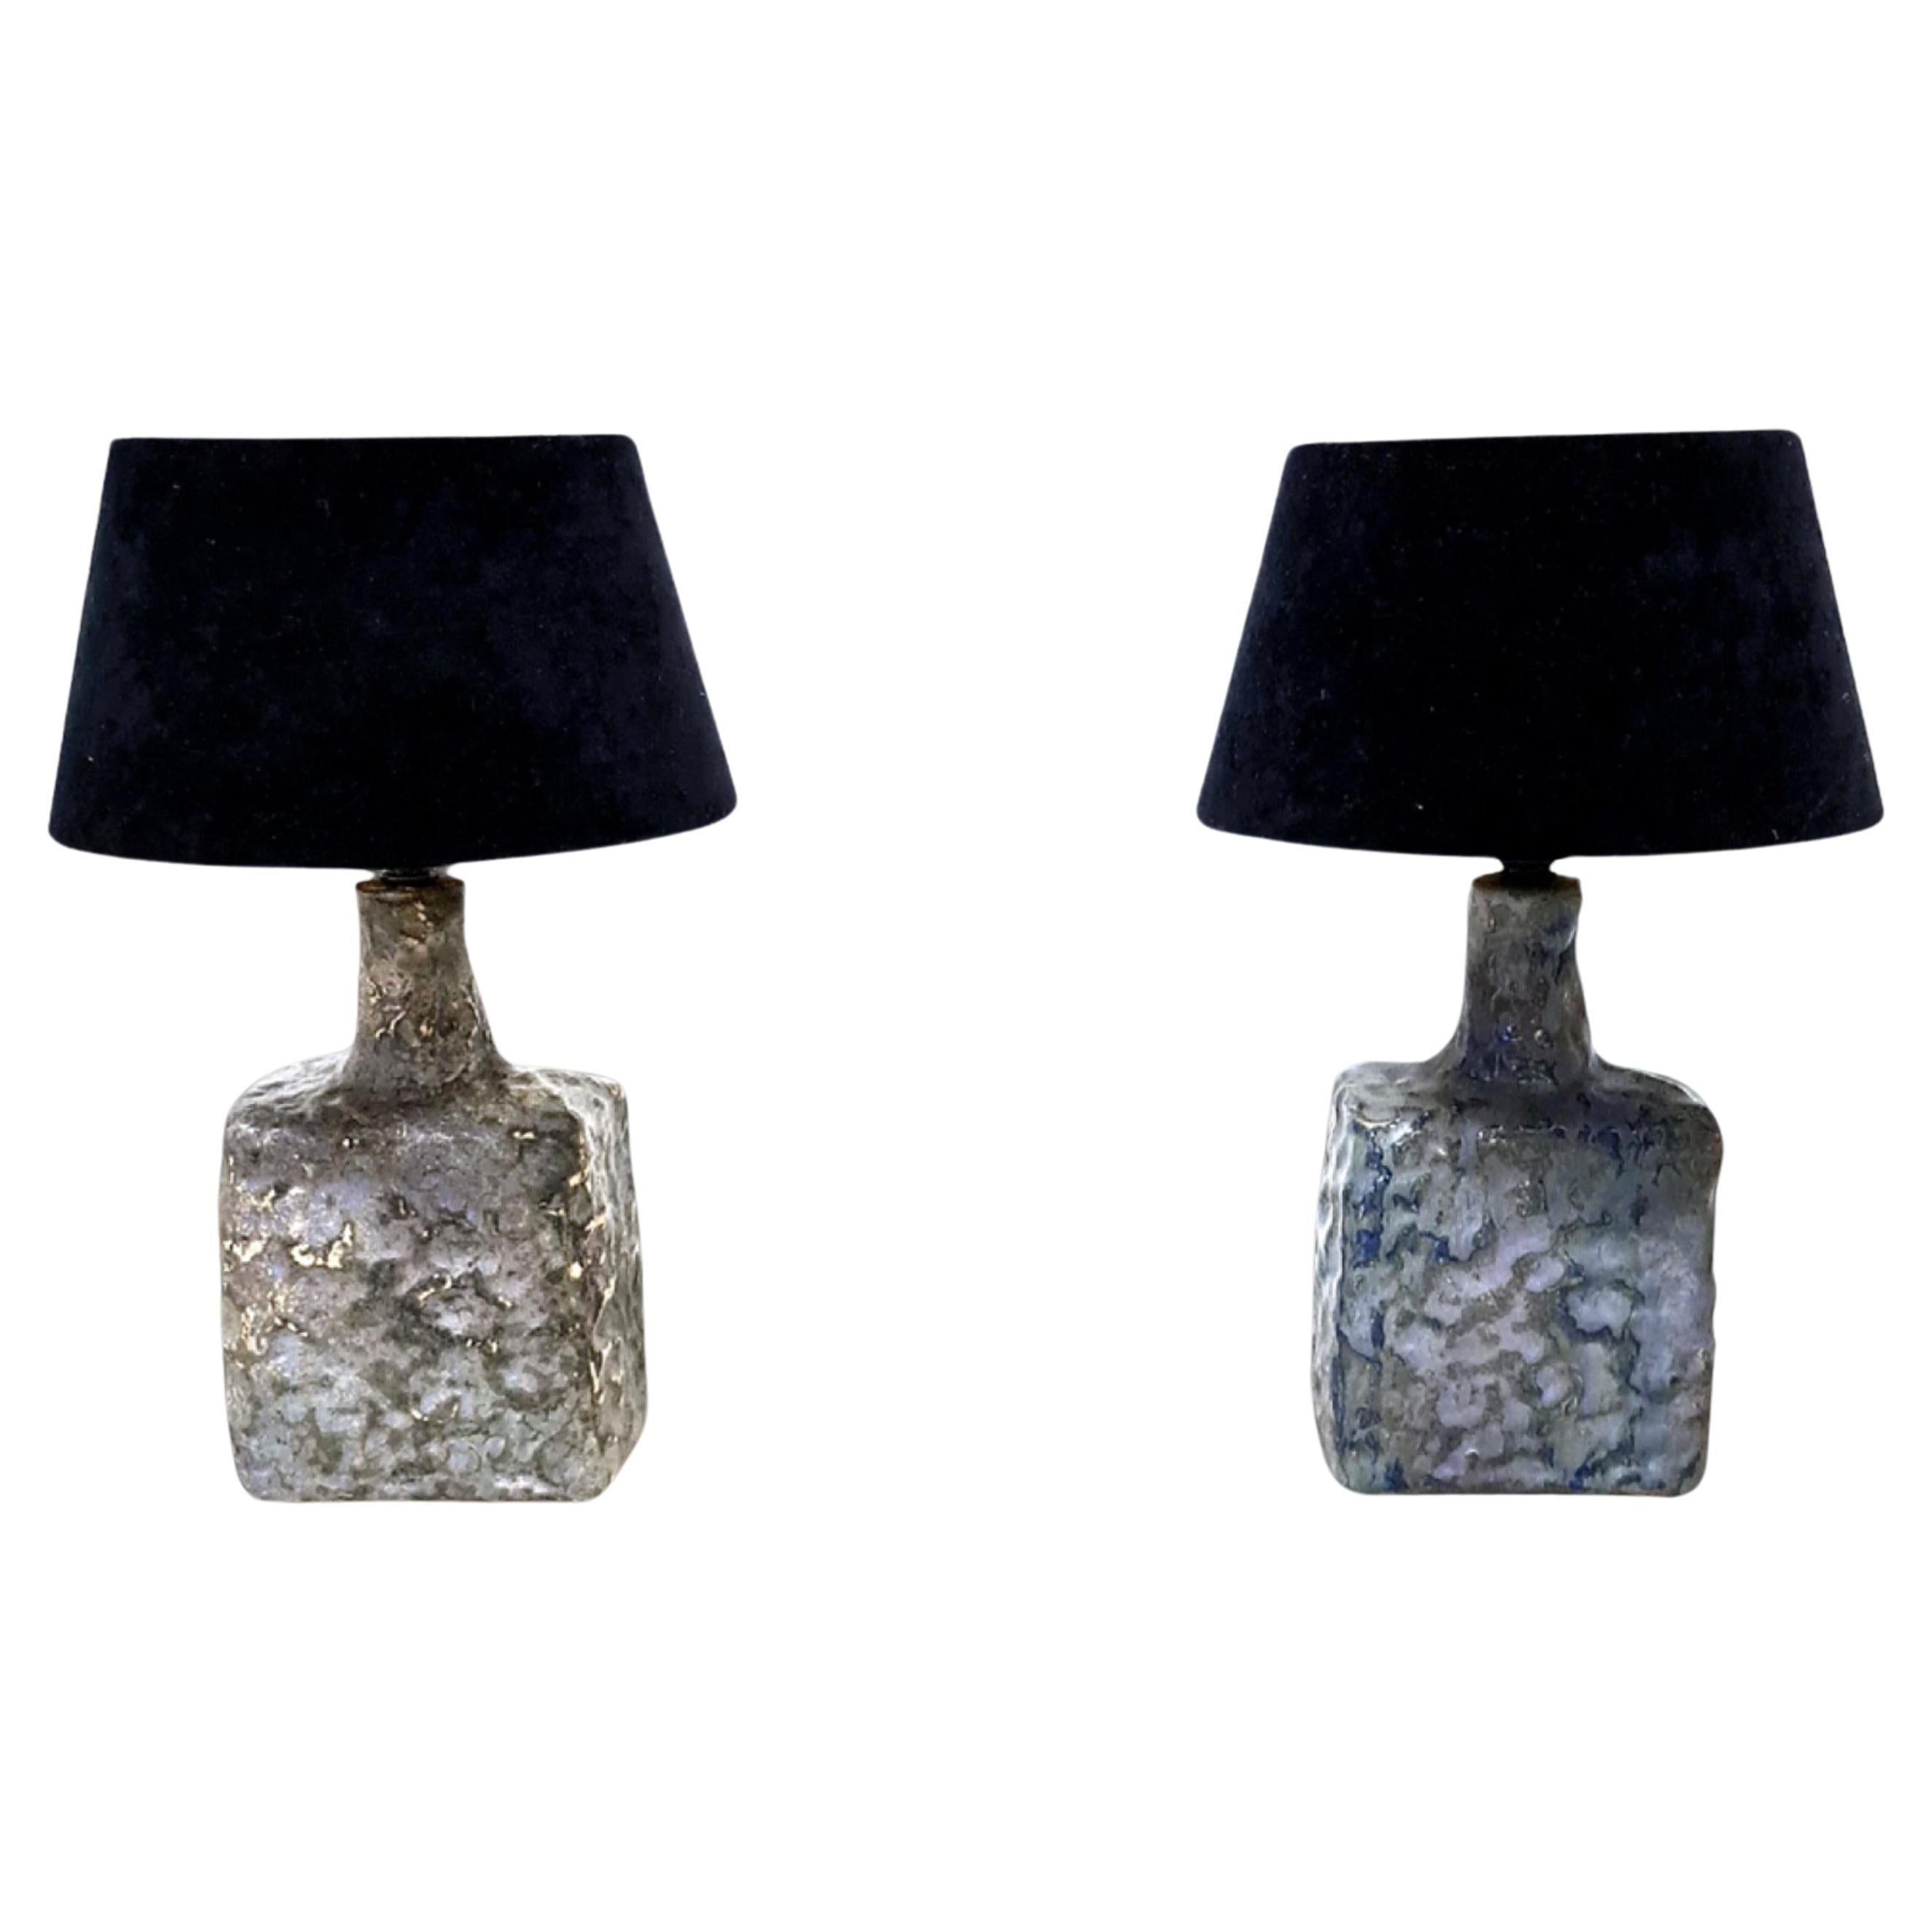 Set of 2 Mobach ceramic table lamps, Netherlands 1960s